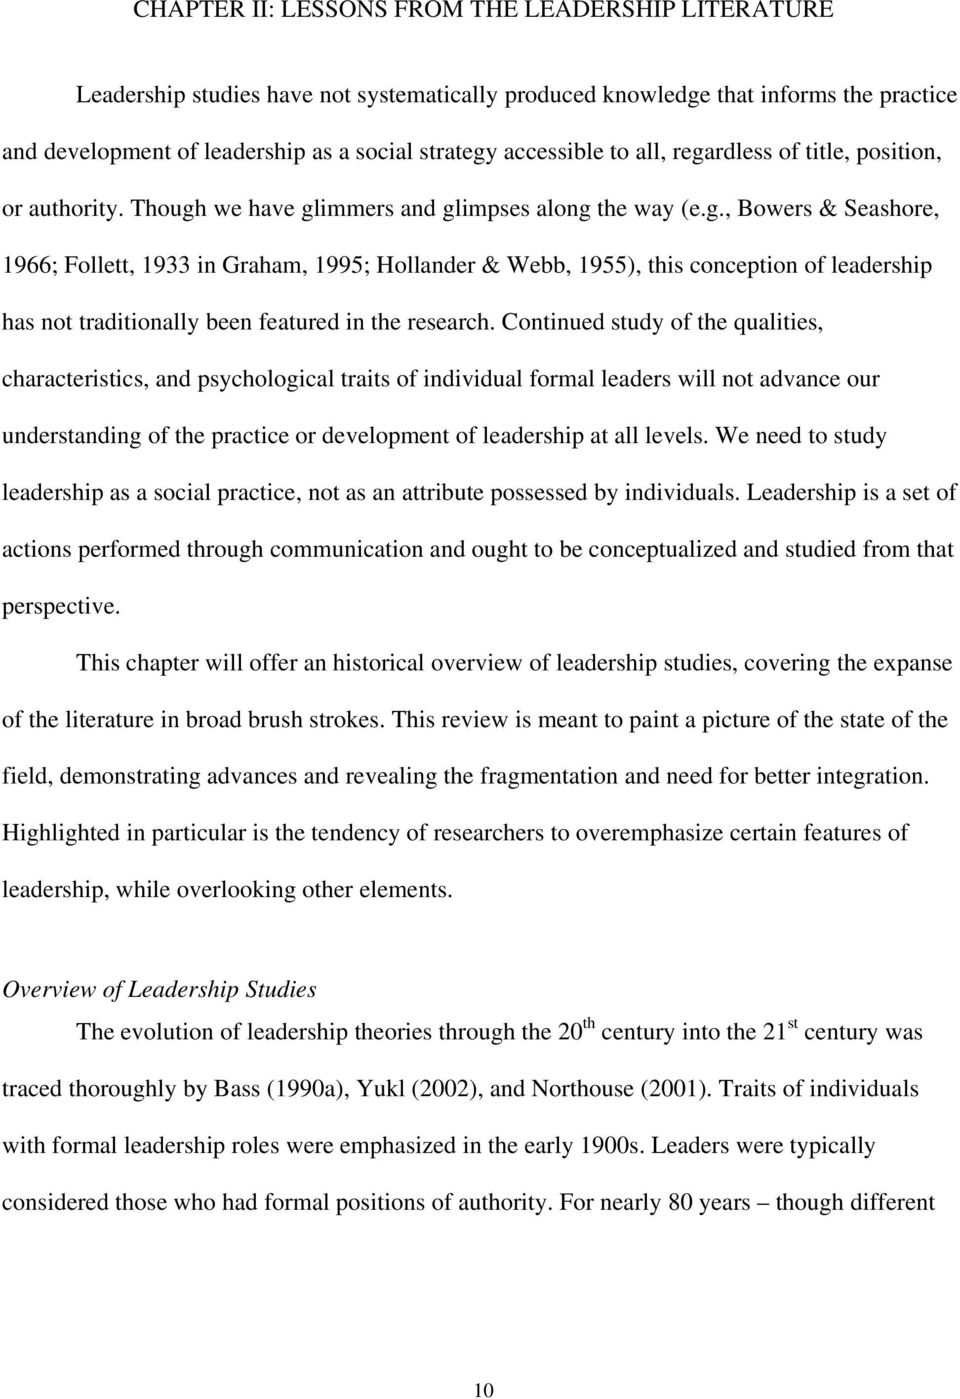 Continued study of the qualities, characteristics, and psychological traits of individual formal leaders will not advance our understanding of the practice or development of leadership at all levels.